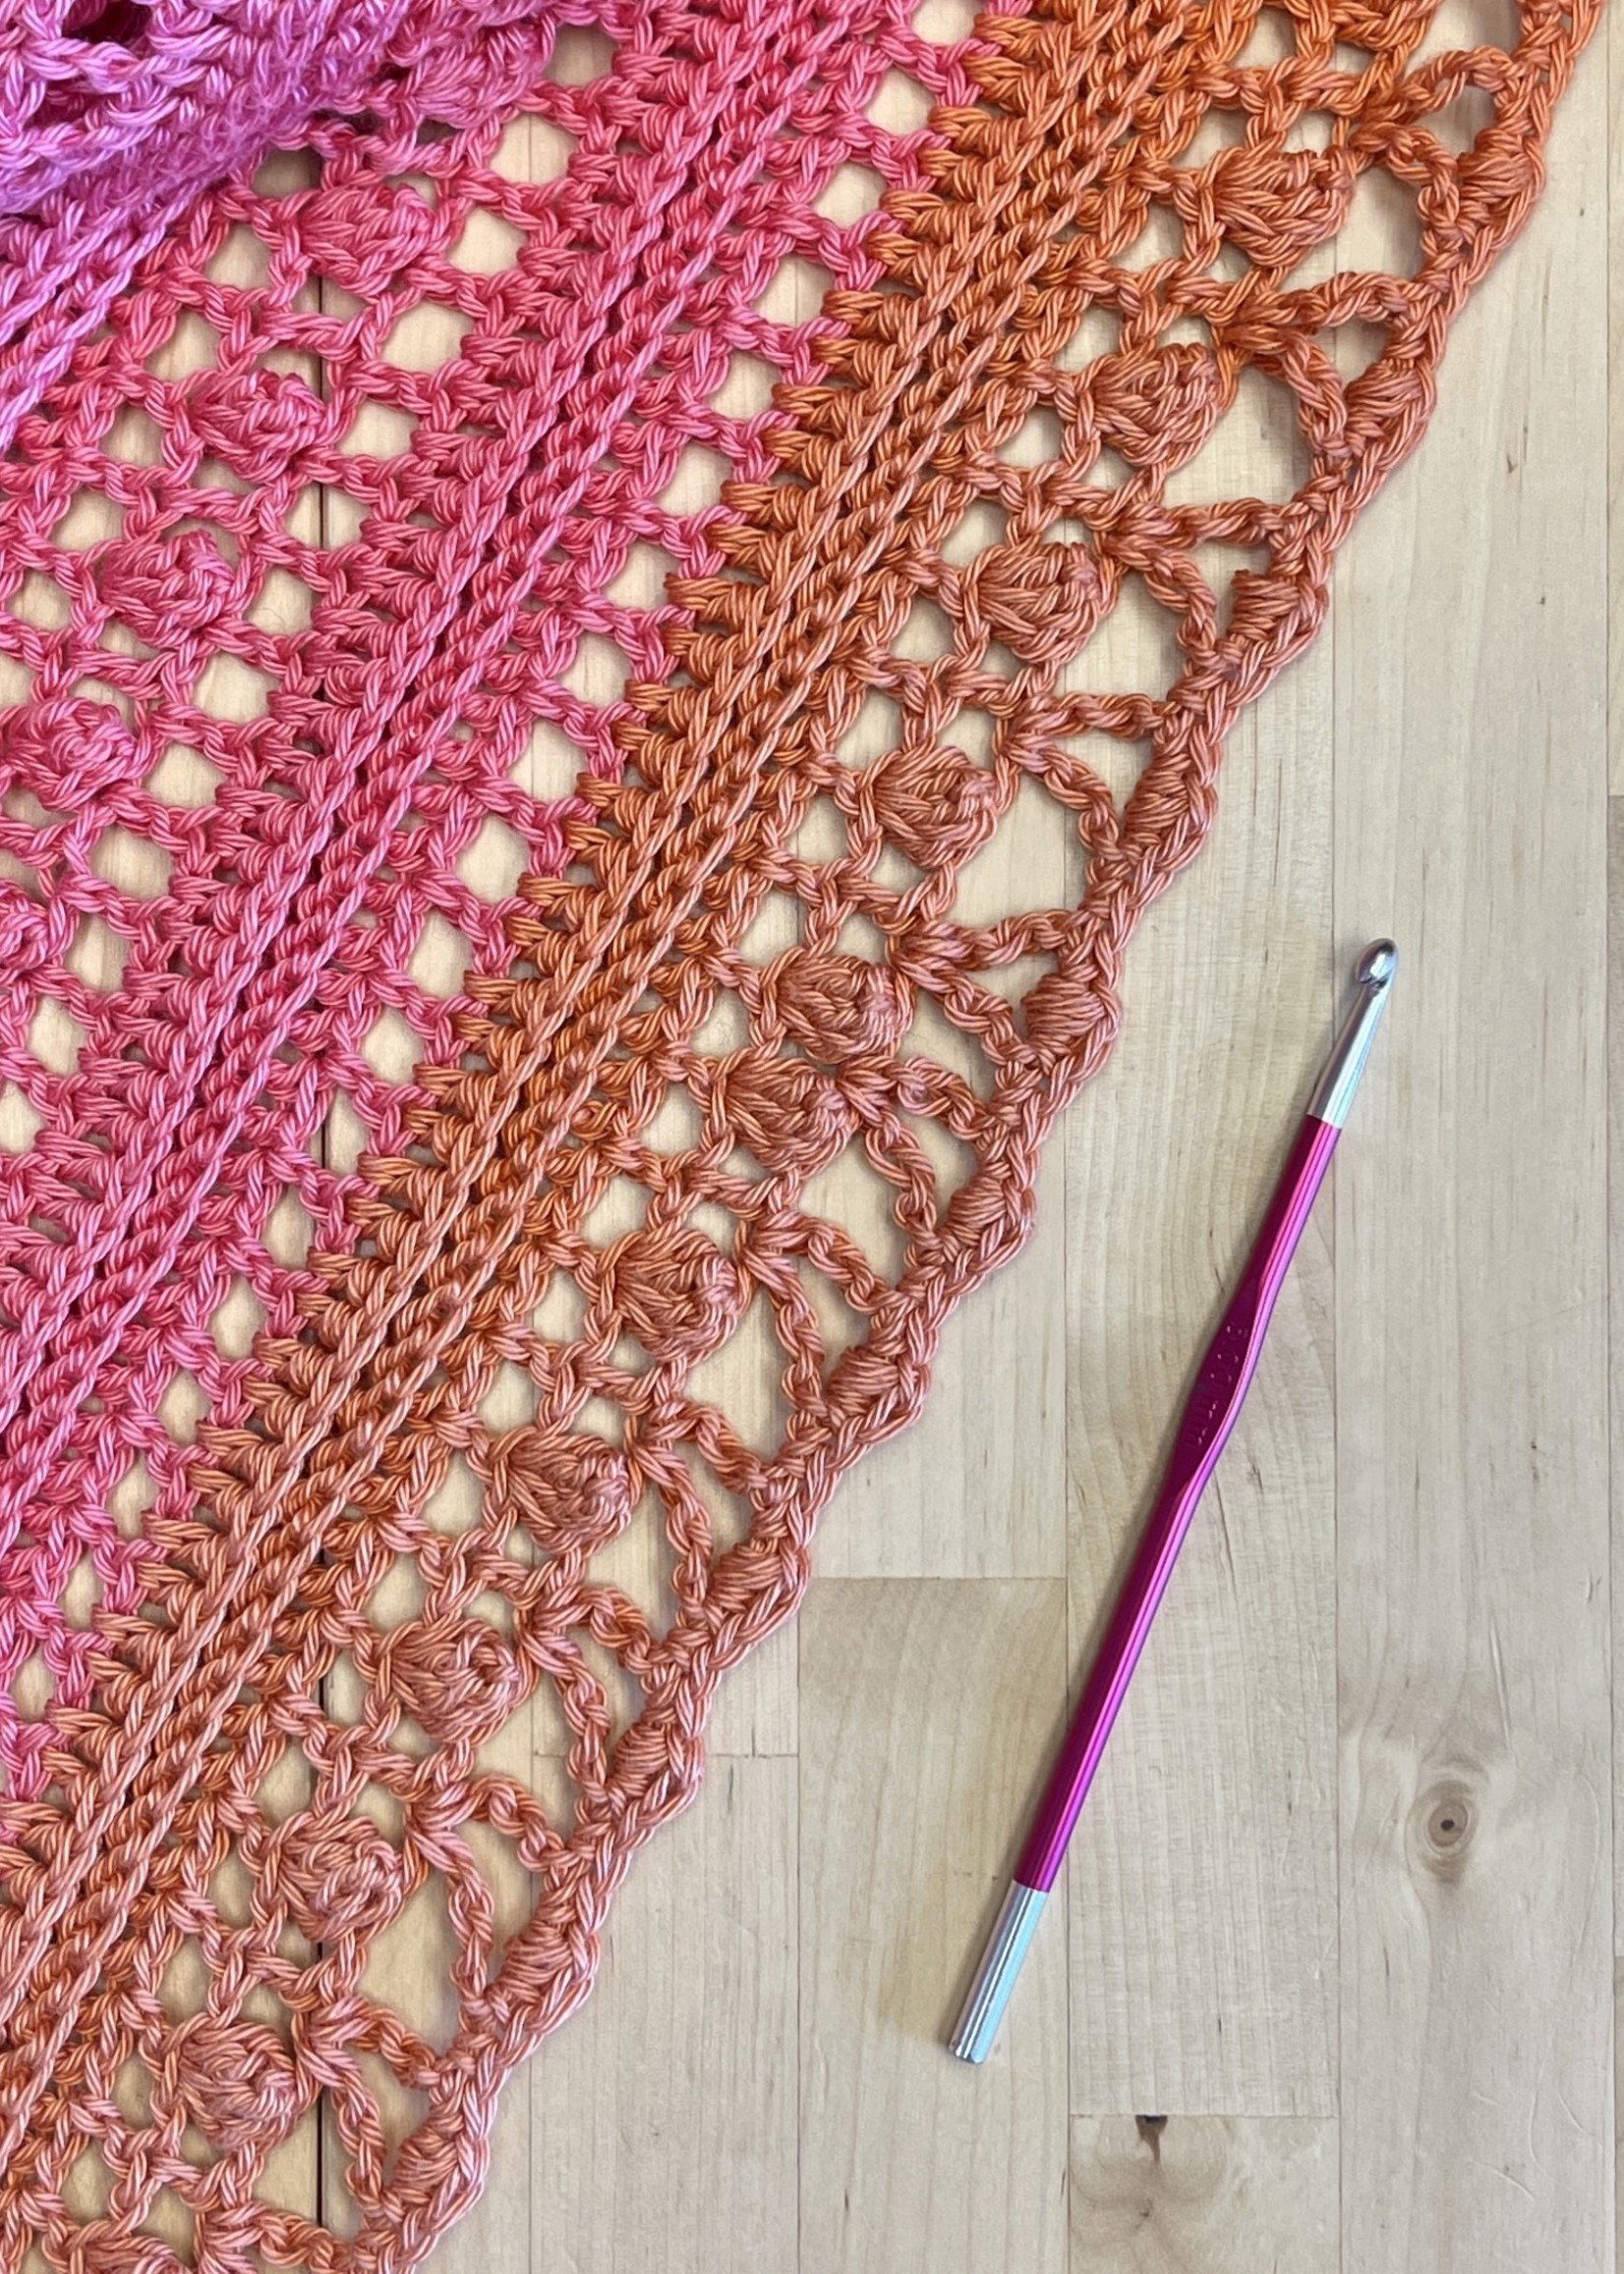 In Person - Learn to Crochet Part 2